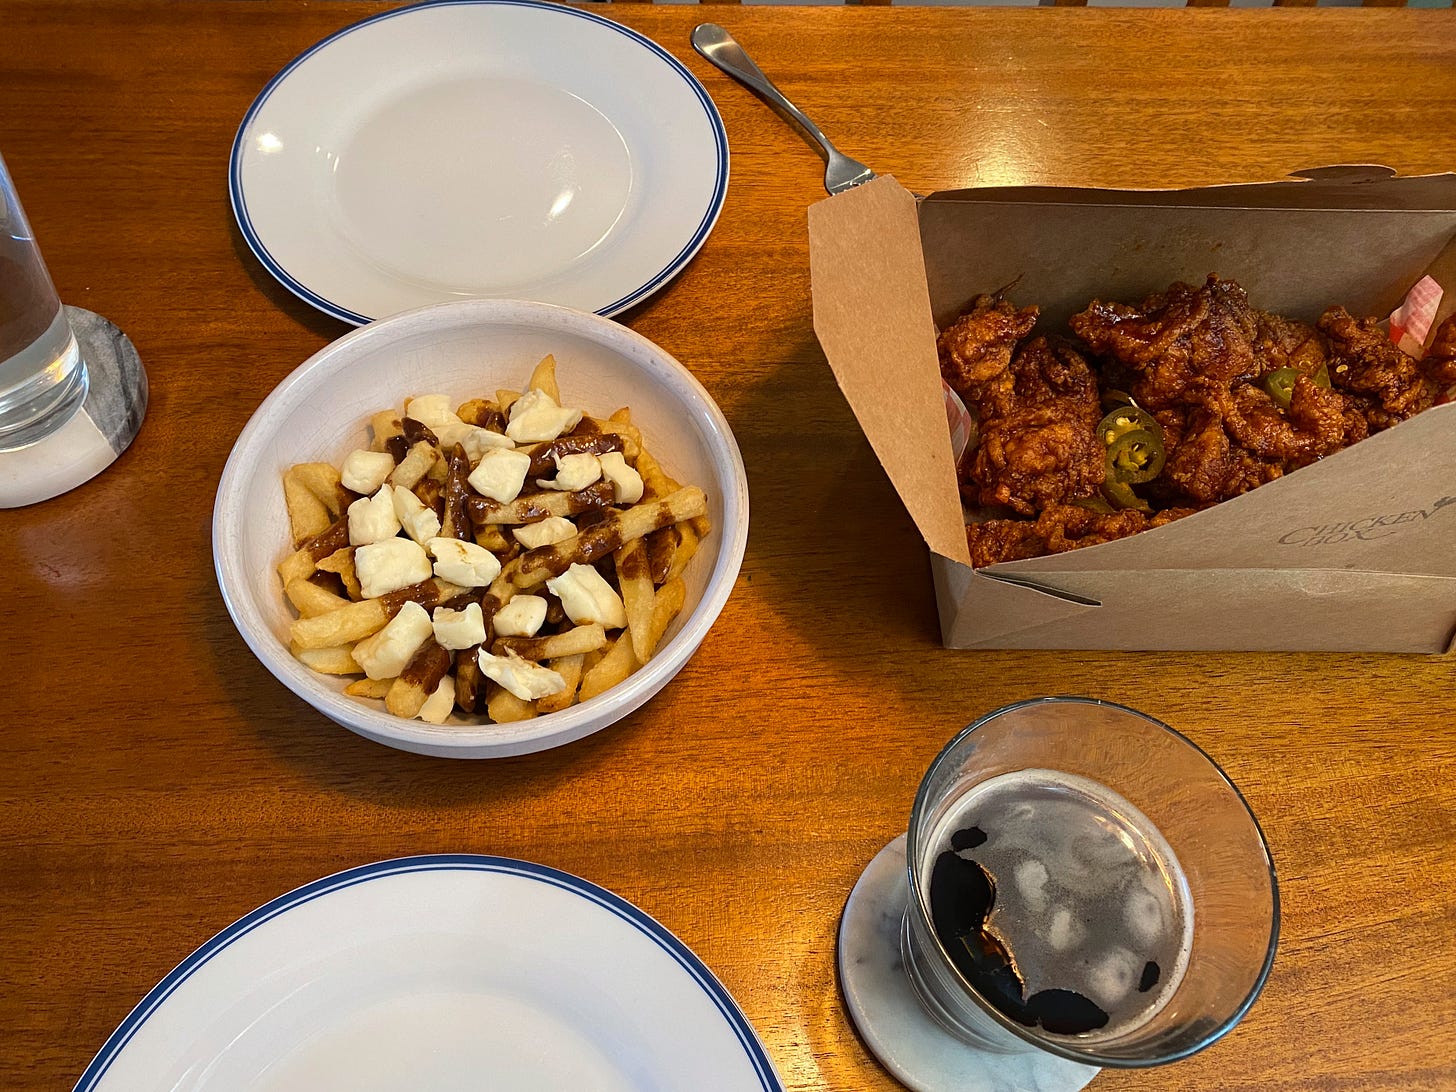 Two plates across from each other on the table. Between them is a white bowl filled with poutine, and a paper takeout box of chicken pieces in a spicy sauce, with pickled jalapeños sprinkled over top.